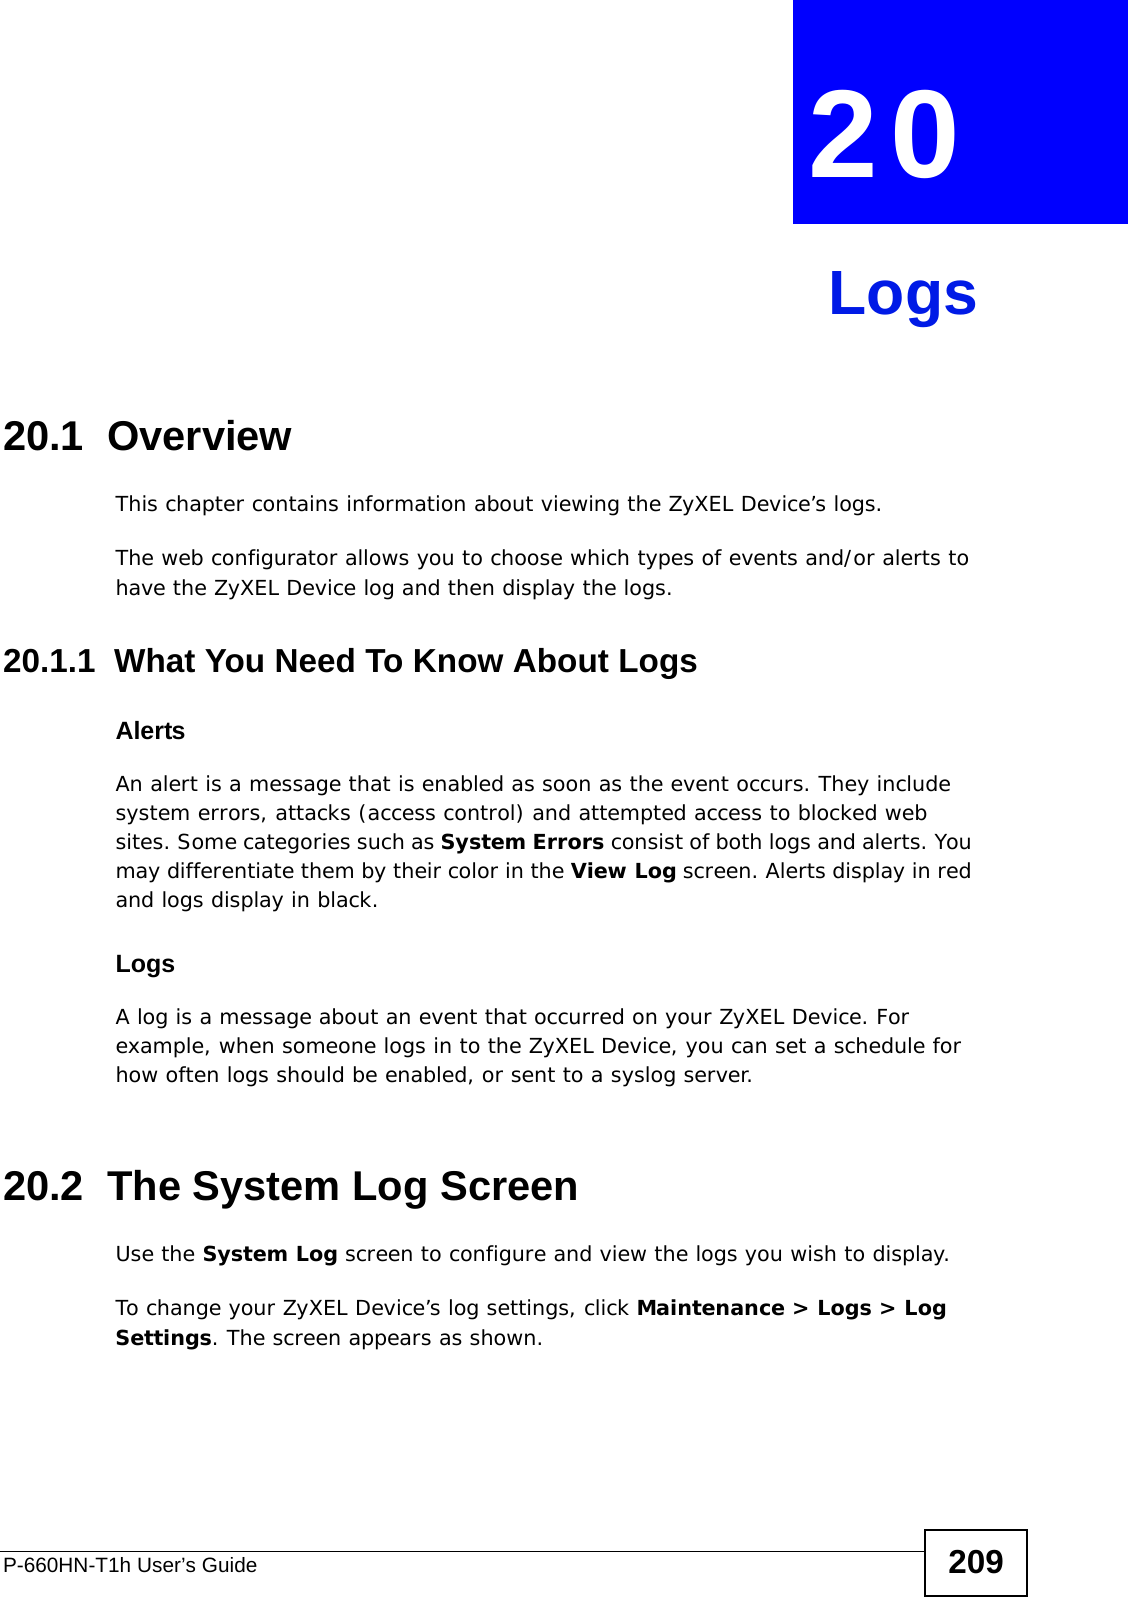 P-660HN-T1h User’s Guide 209CHAPTER  20 Logs20.1  OverviewThis chapter contains information about viewing the ZyXEL Device’s logs.The web configurator allows you to choose which types of events and/or alerts to have the ZyXEL Device log and then display the logs. 20.1.1  What You Need To Know About LogsAlertsAn alert is a message that is enabled as soon as the event occurs. They include system errors, attacks (access control) and attempted access to blocked web sites. Some categories such as System Errors consist of both logs and alerts. You may differentiate them by their color in the View Log screen. Alerts display in red and logs display in black.LogsA log is a message about an event that occurred on your ZyXEL Device. For example, when someone logs in to the ZyXEL Device, you can set a schedule for how often logs should be enabled, or sent to a syslog server.20.2  The System Log ScreenUse the System Log screen to configure and view the logs you wish to display.To change your ZyXEL Device’s log settings, click Maintenance &gt; Logs &gt; Log Settings. The screen appears as shown.